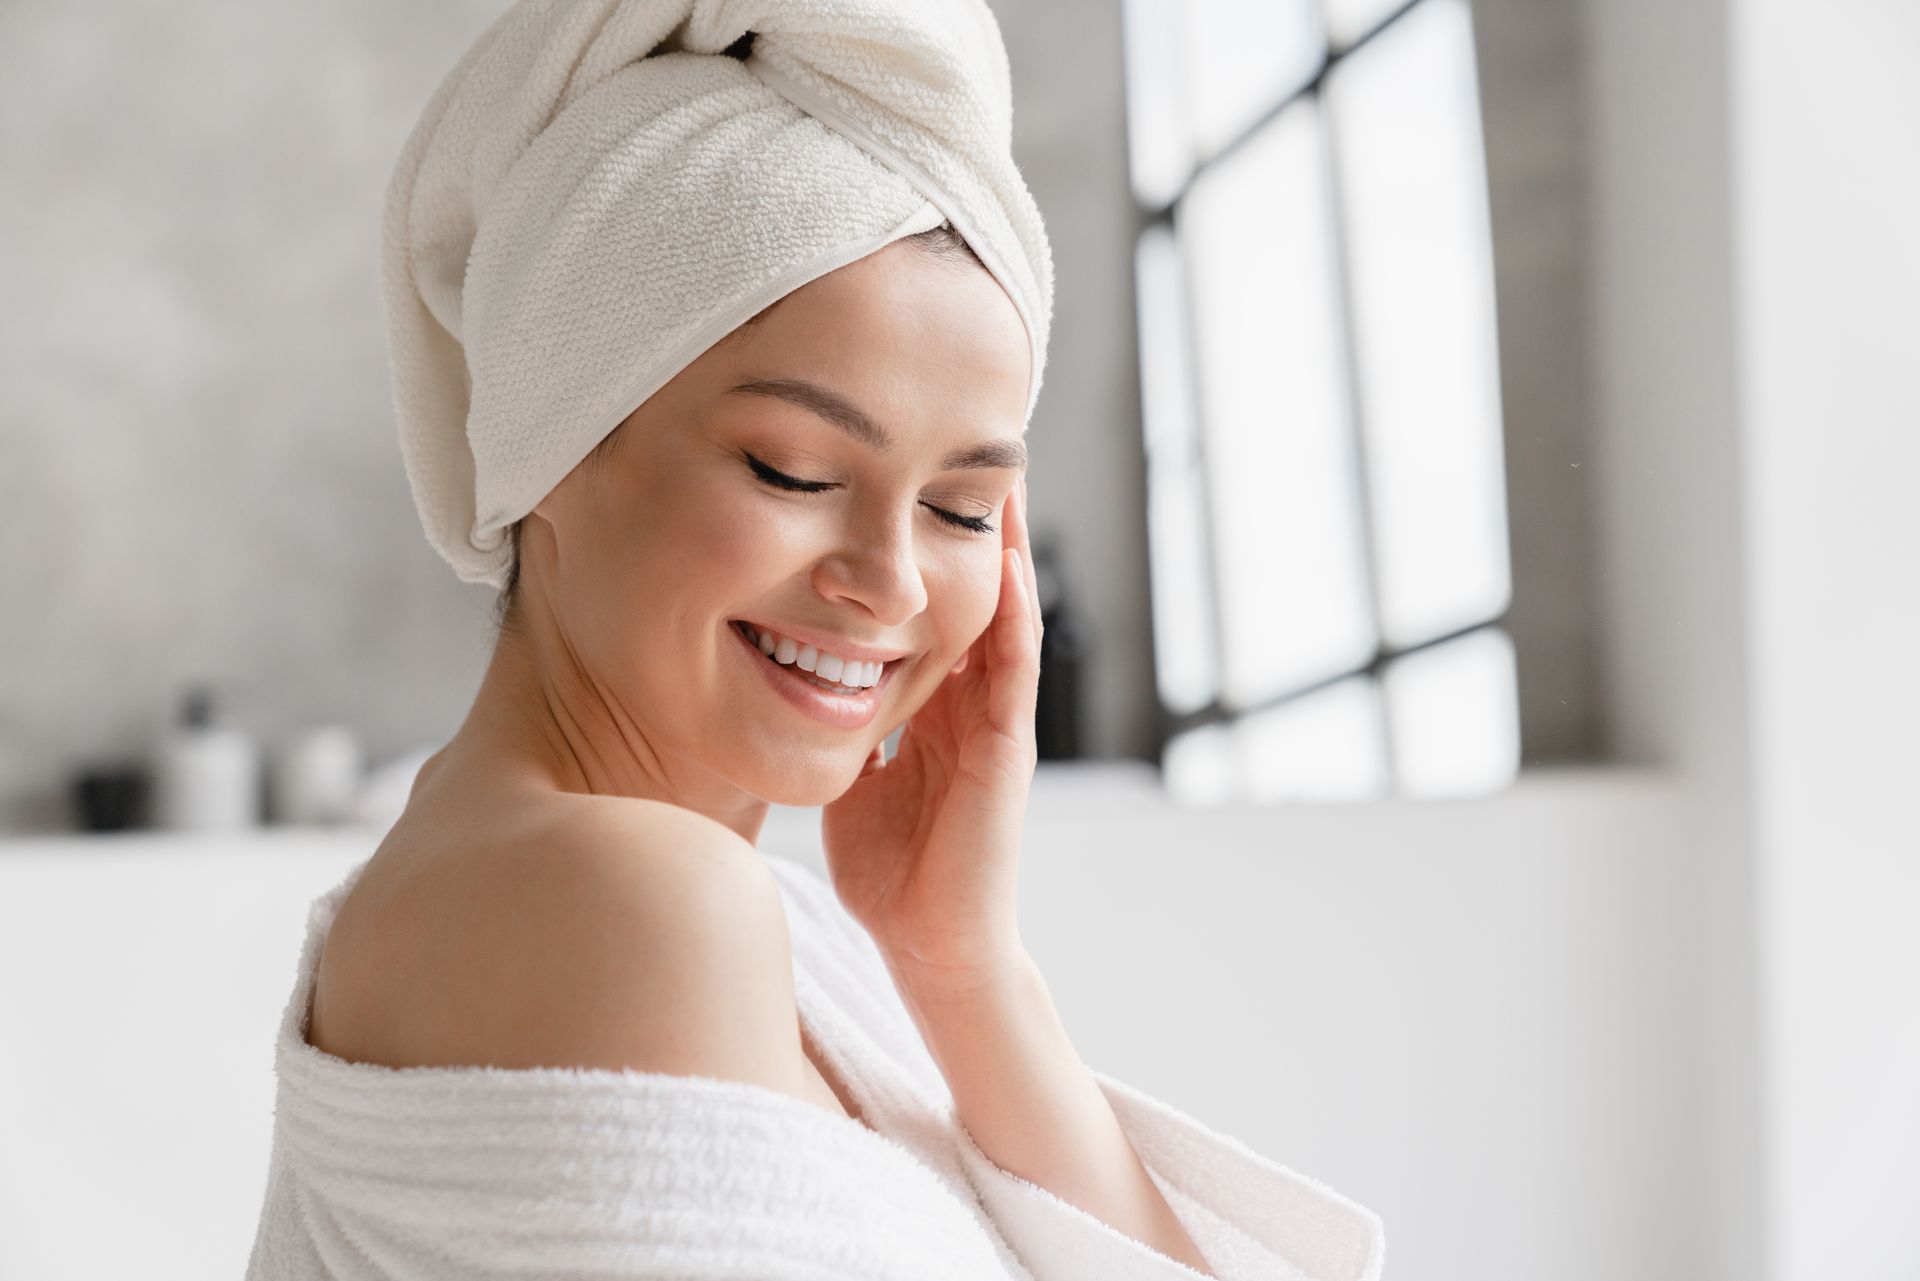 a woman with a towel wrapped around her head is smiling in a bathroom .